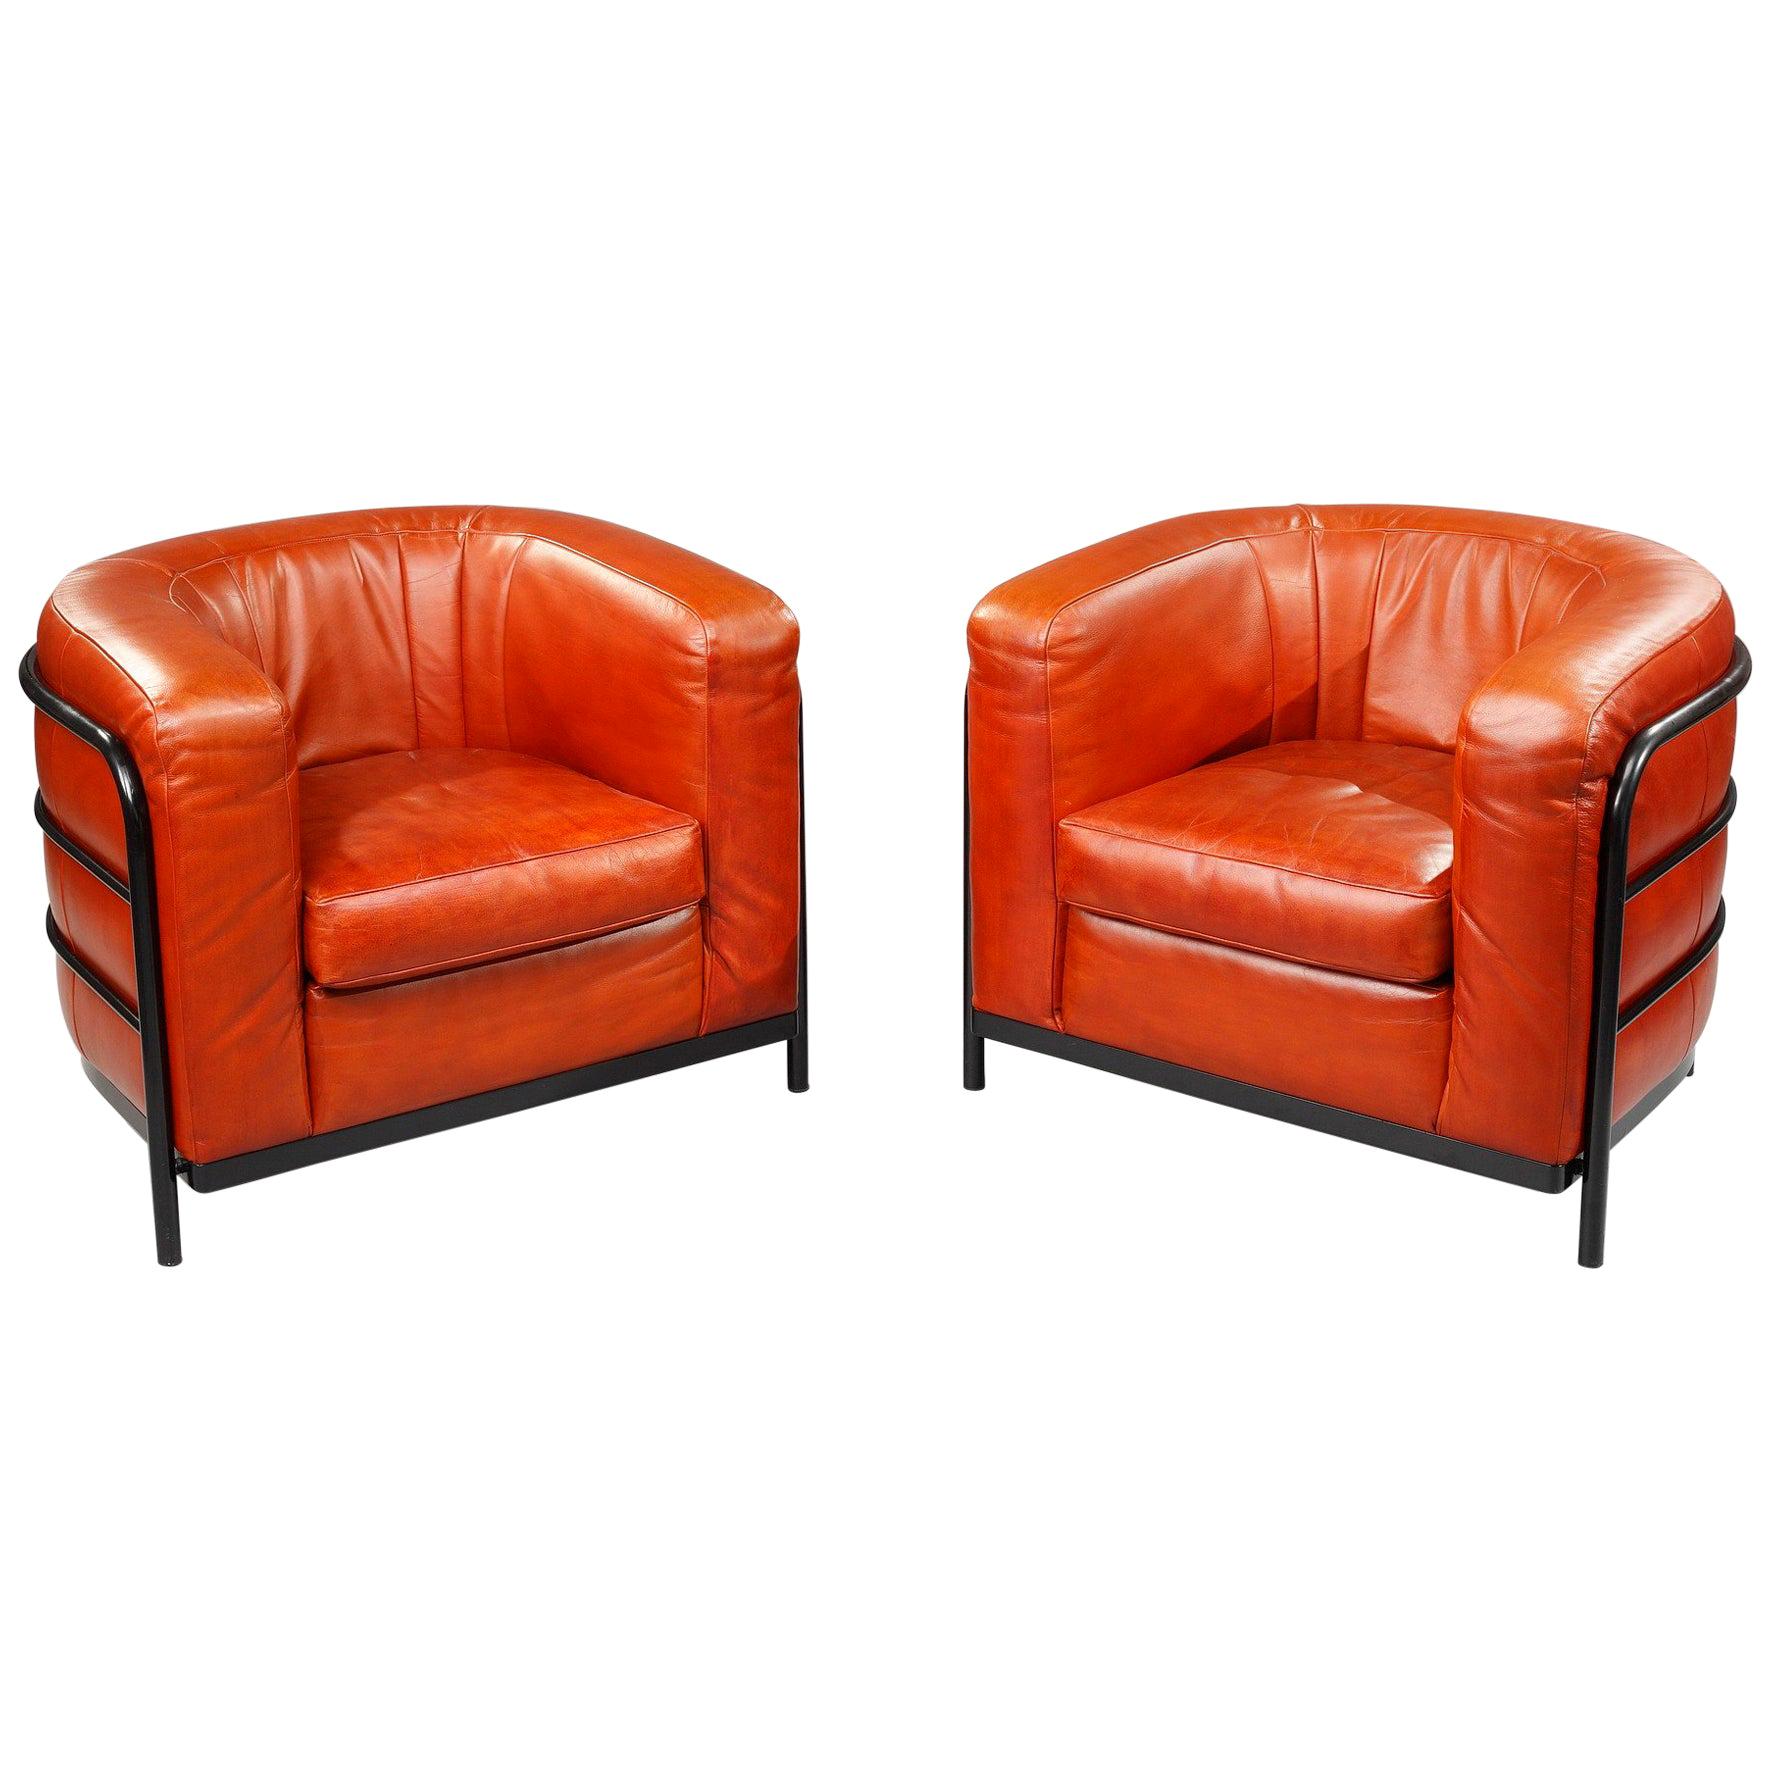 Onda Armchairs in Leather by Zanotta Italy, Set of 2